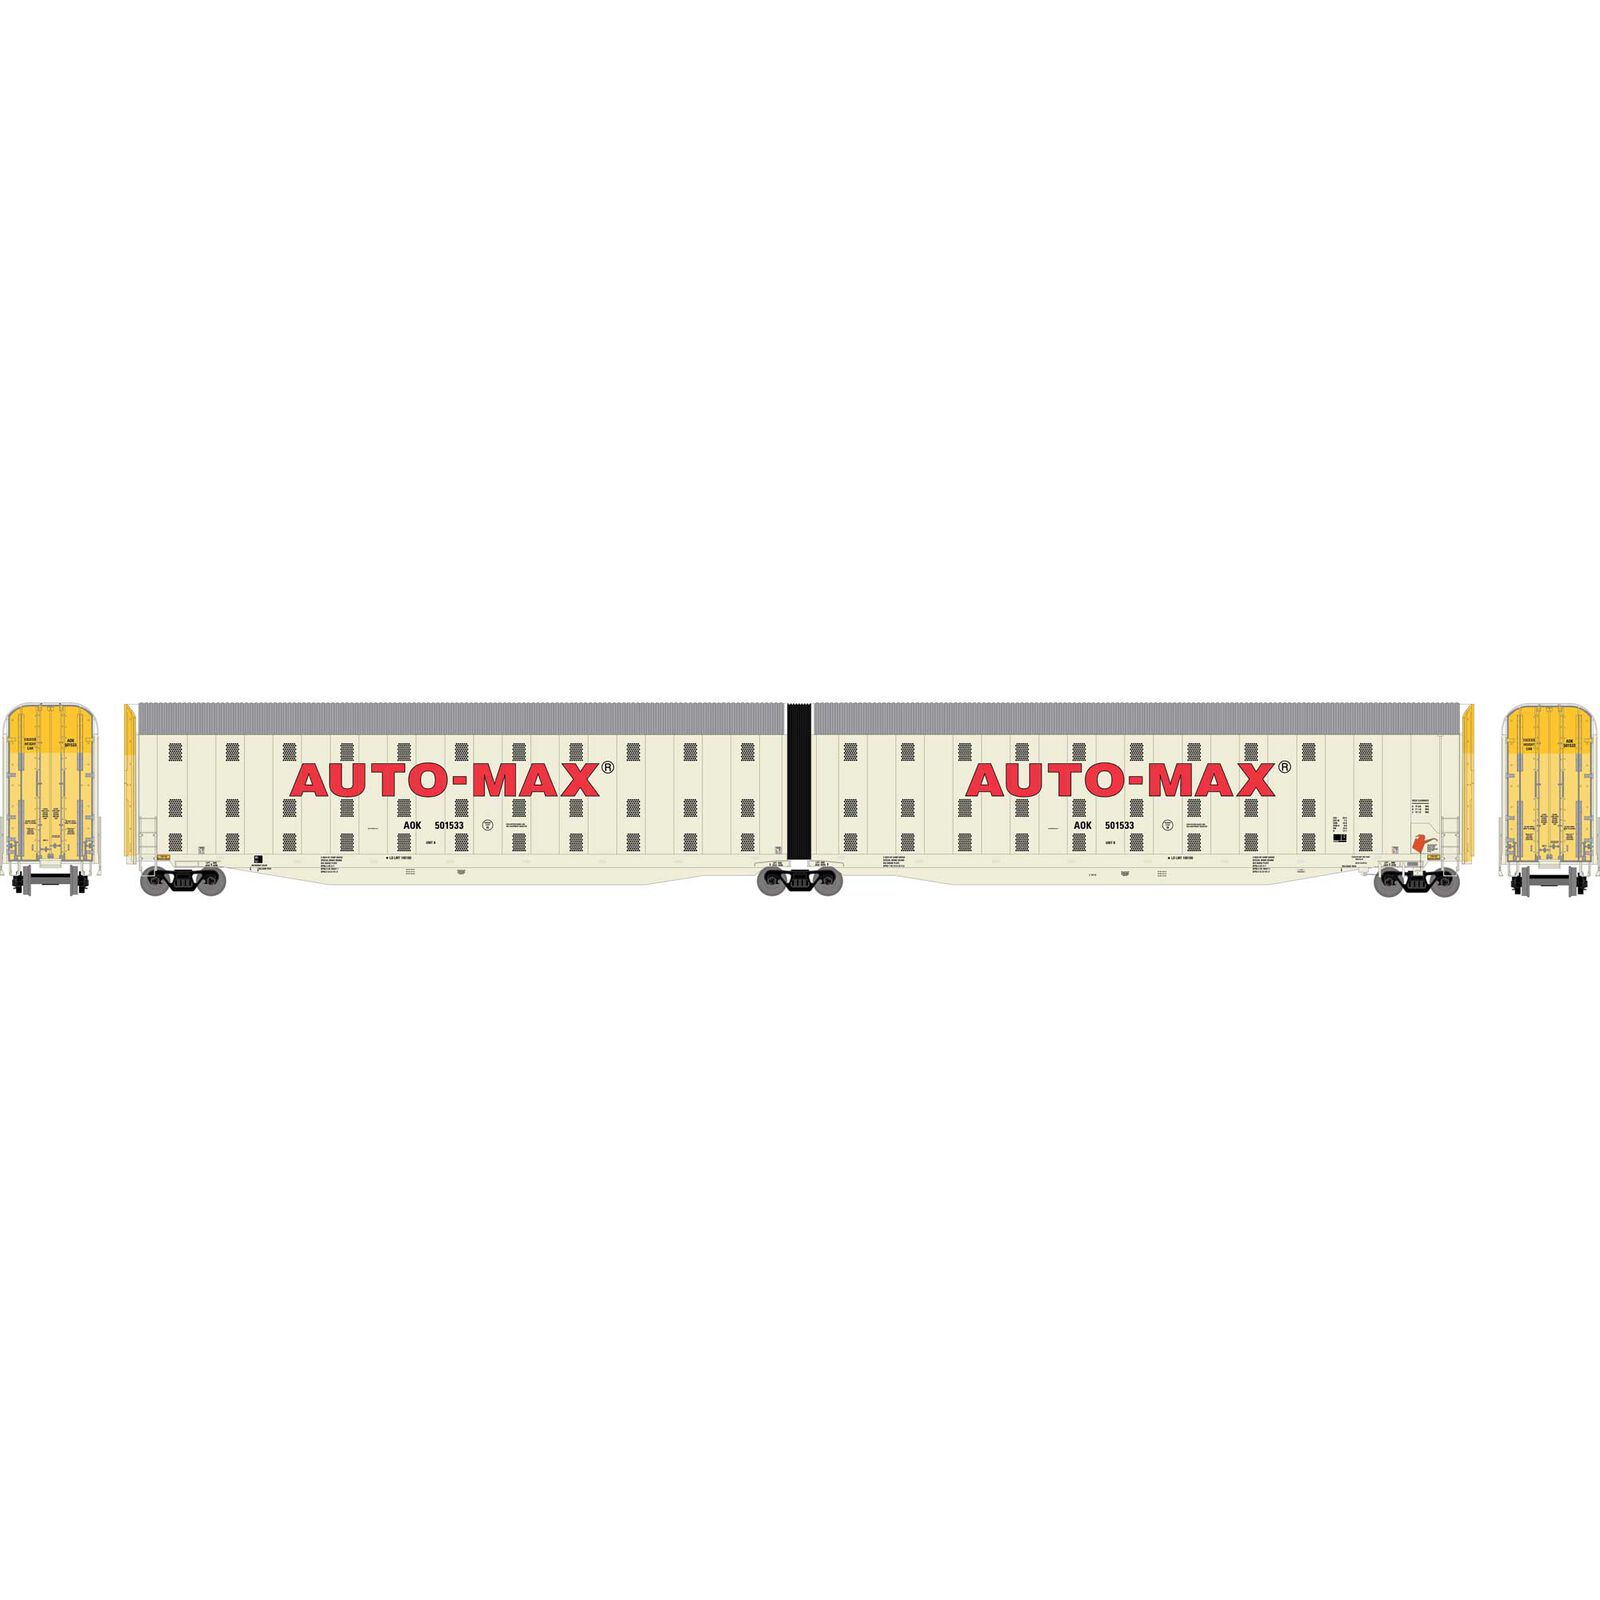 HO Auto-Max Carrier, AOK #501533